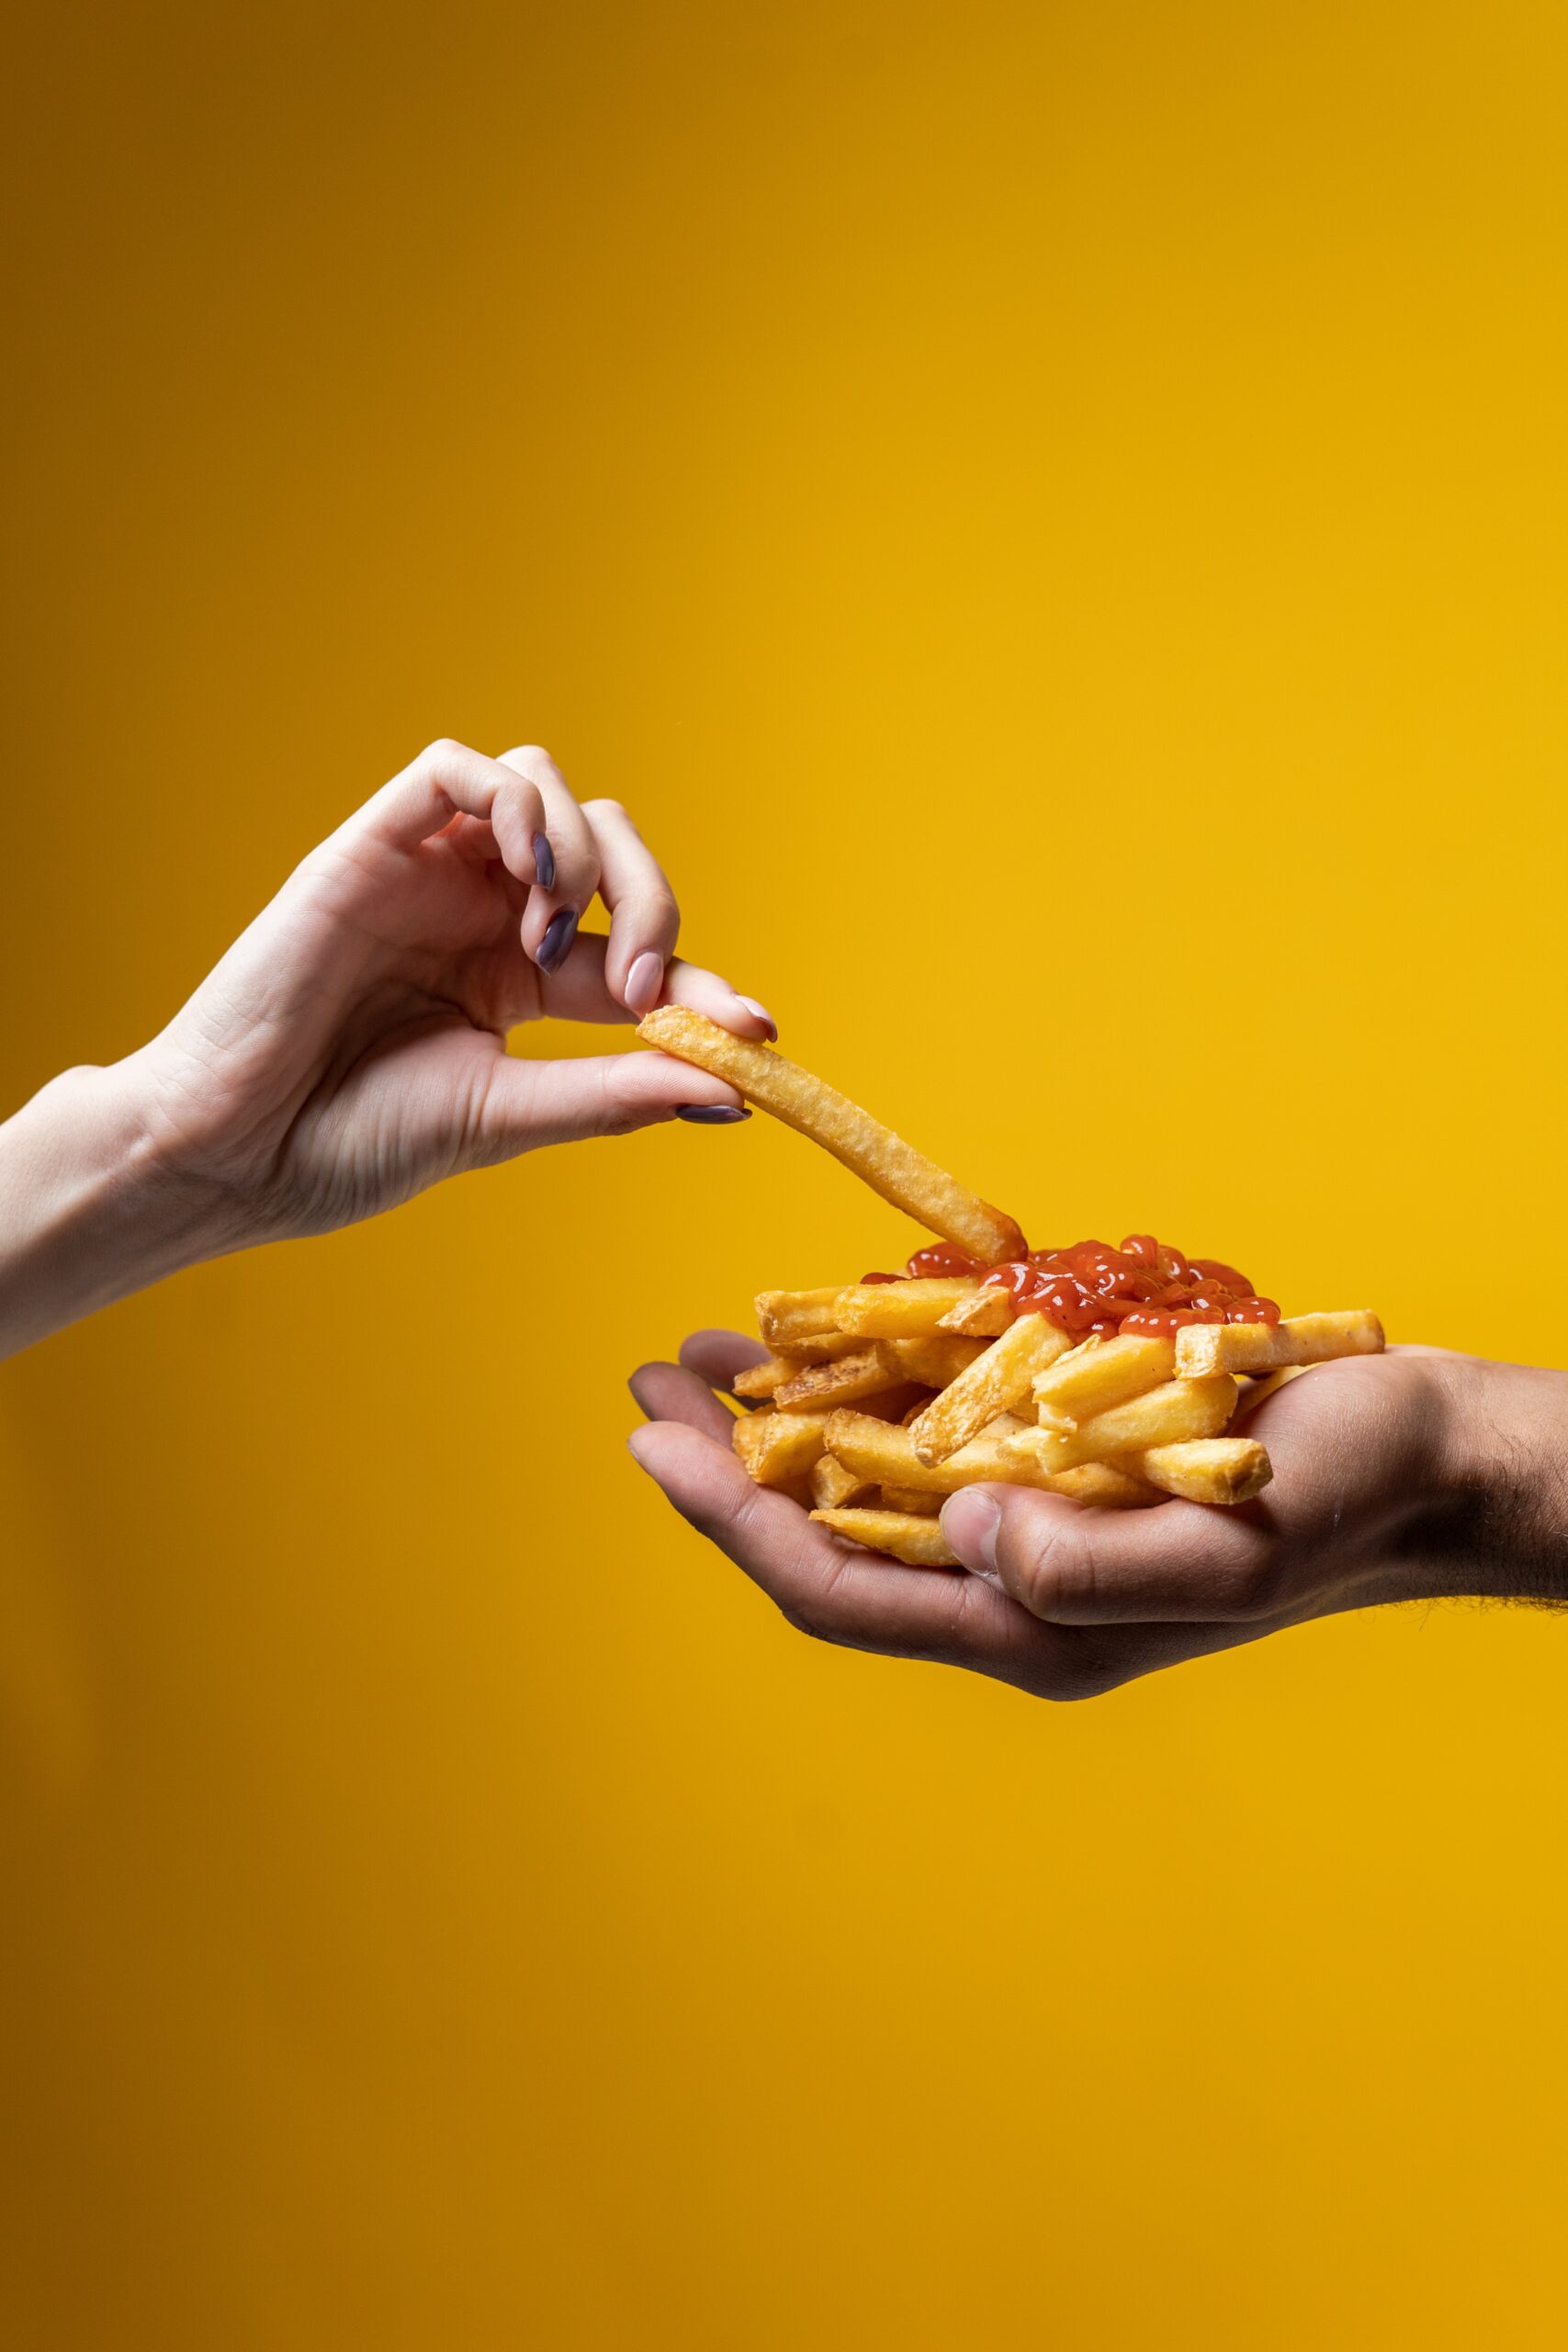 two outstretch hands hold a pile of french fries with some tomato sauce on the top. A third had reaches from the other side of the photo to dip a french fry in the sauce